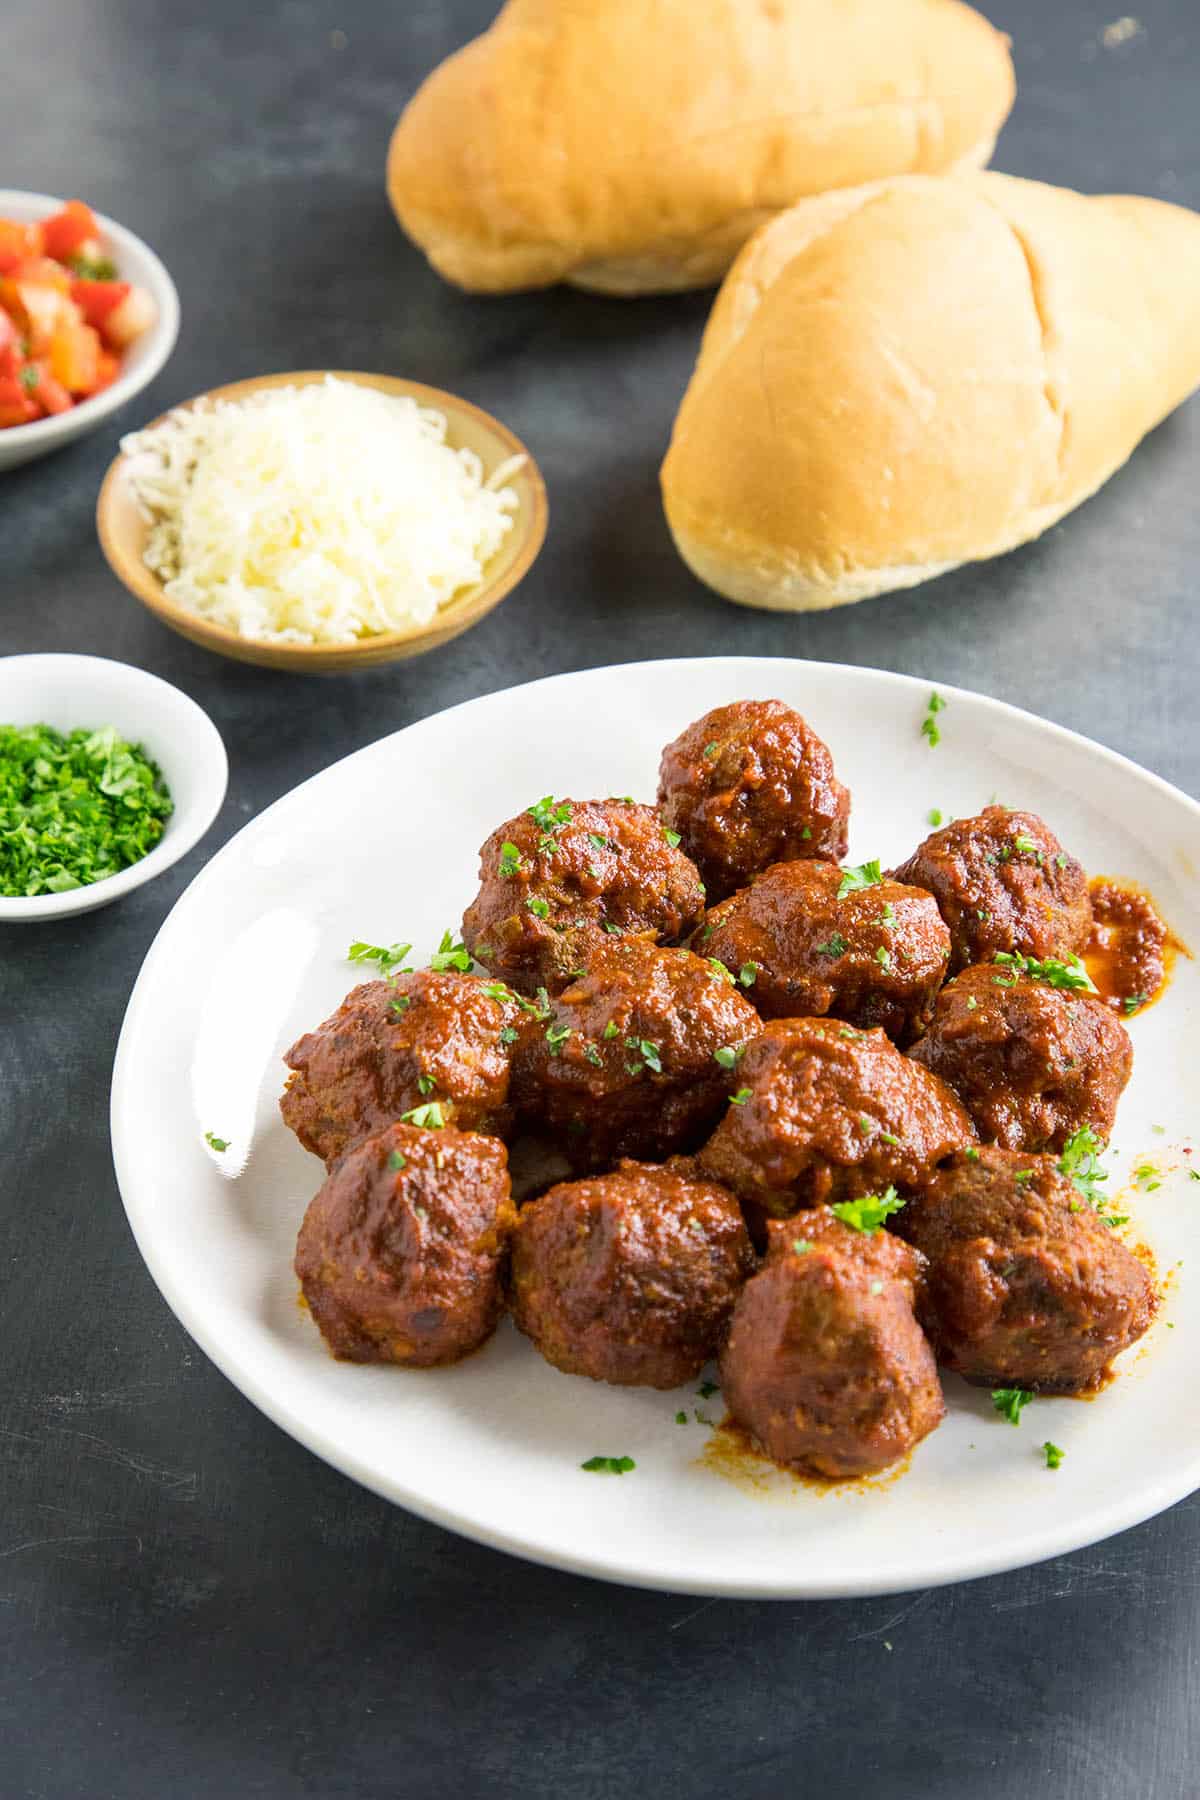 Spicy Meatballs Chipotle Lime Sauce Recipe - Serve them up on buns for a meatball sub sandwich.